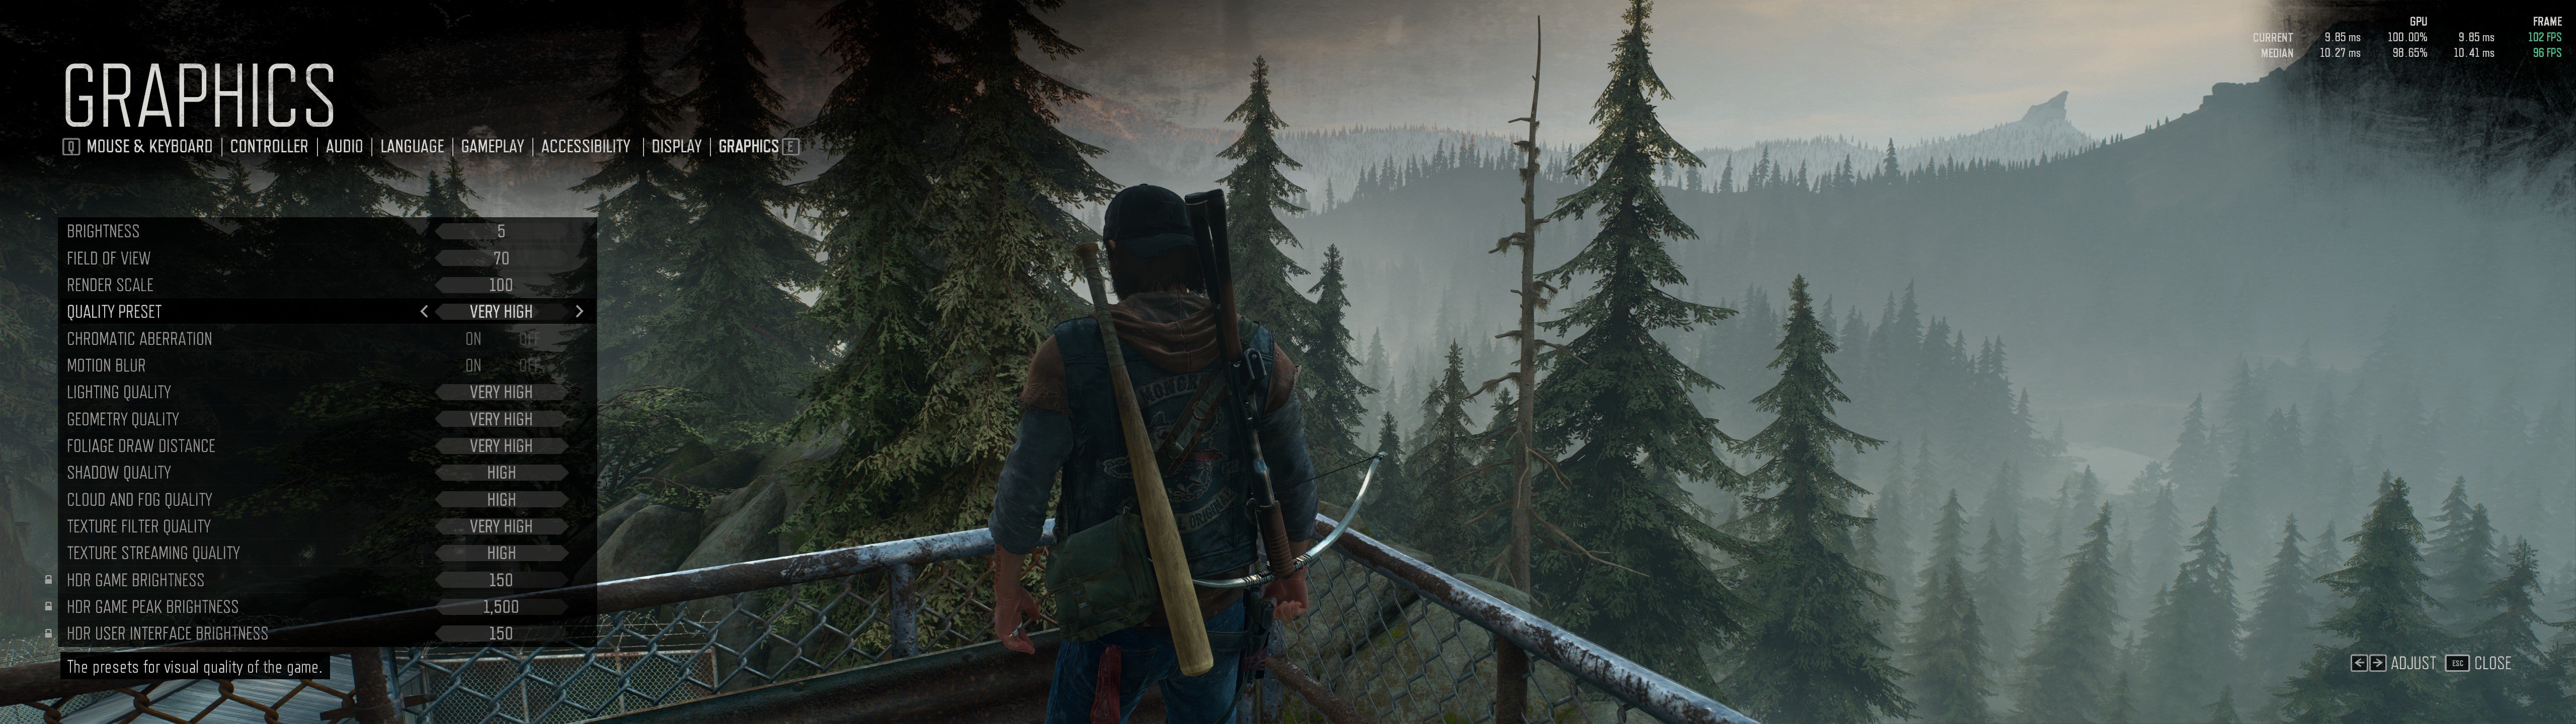 Days Gone's PC graphics menu showing the game using the Very High quality preset